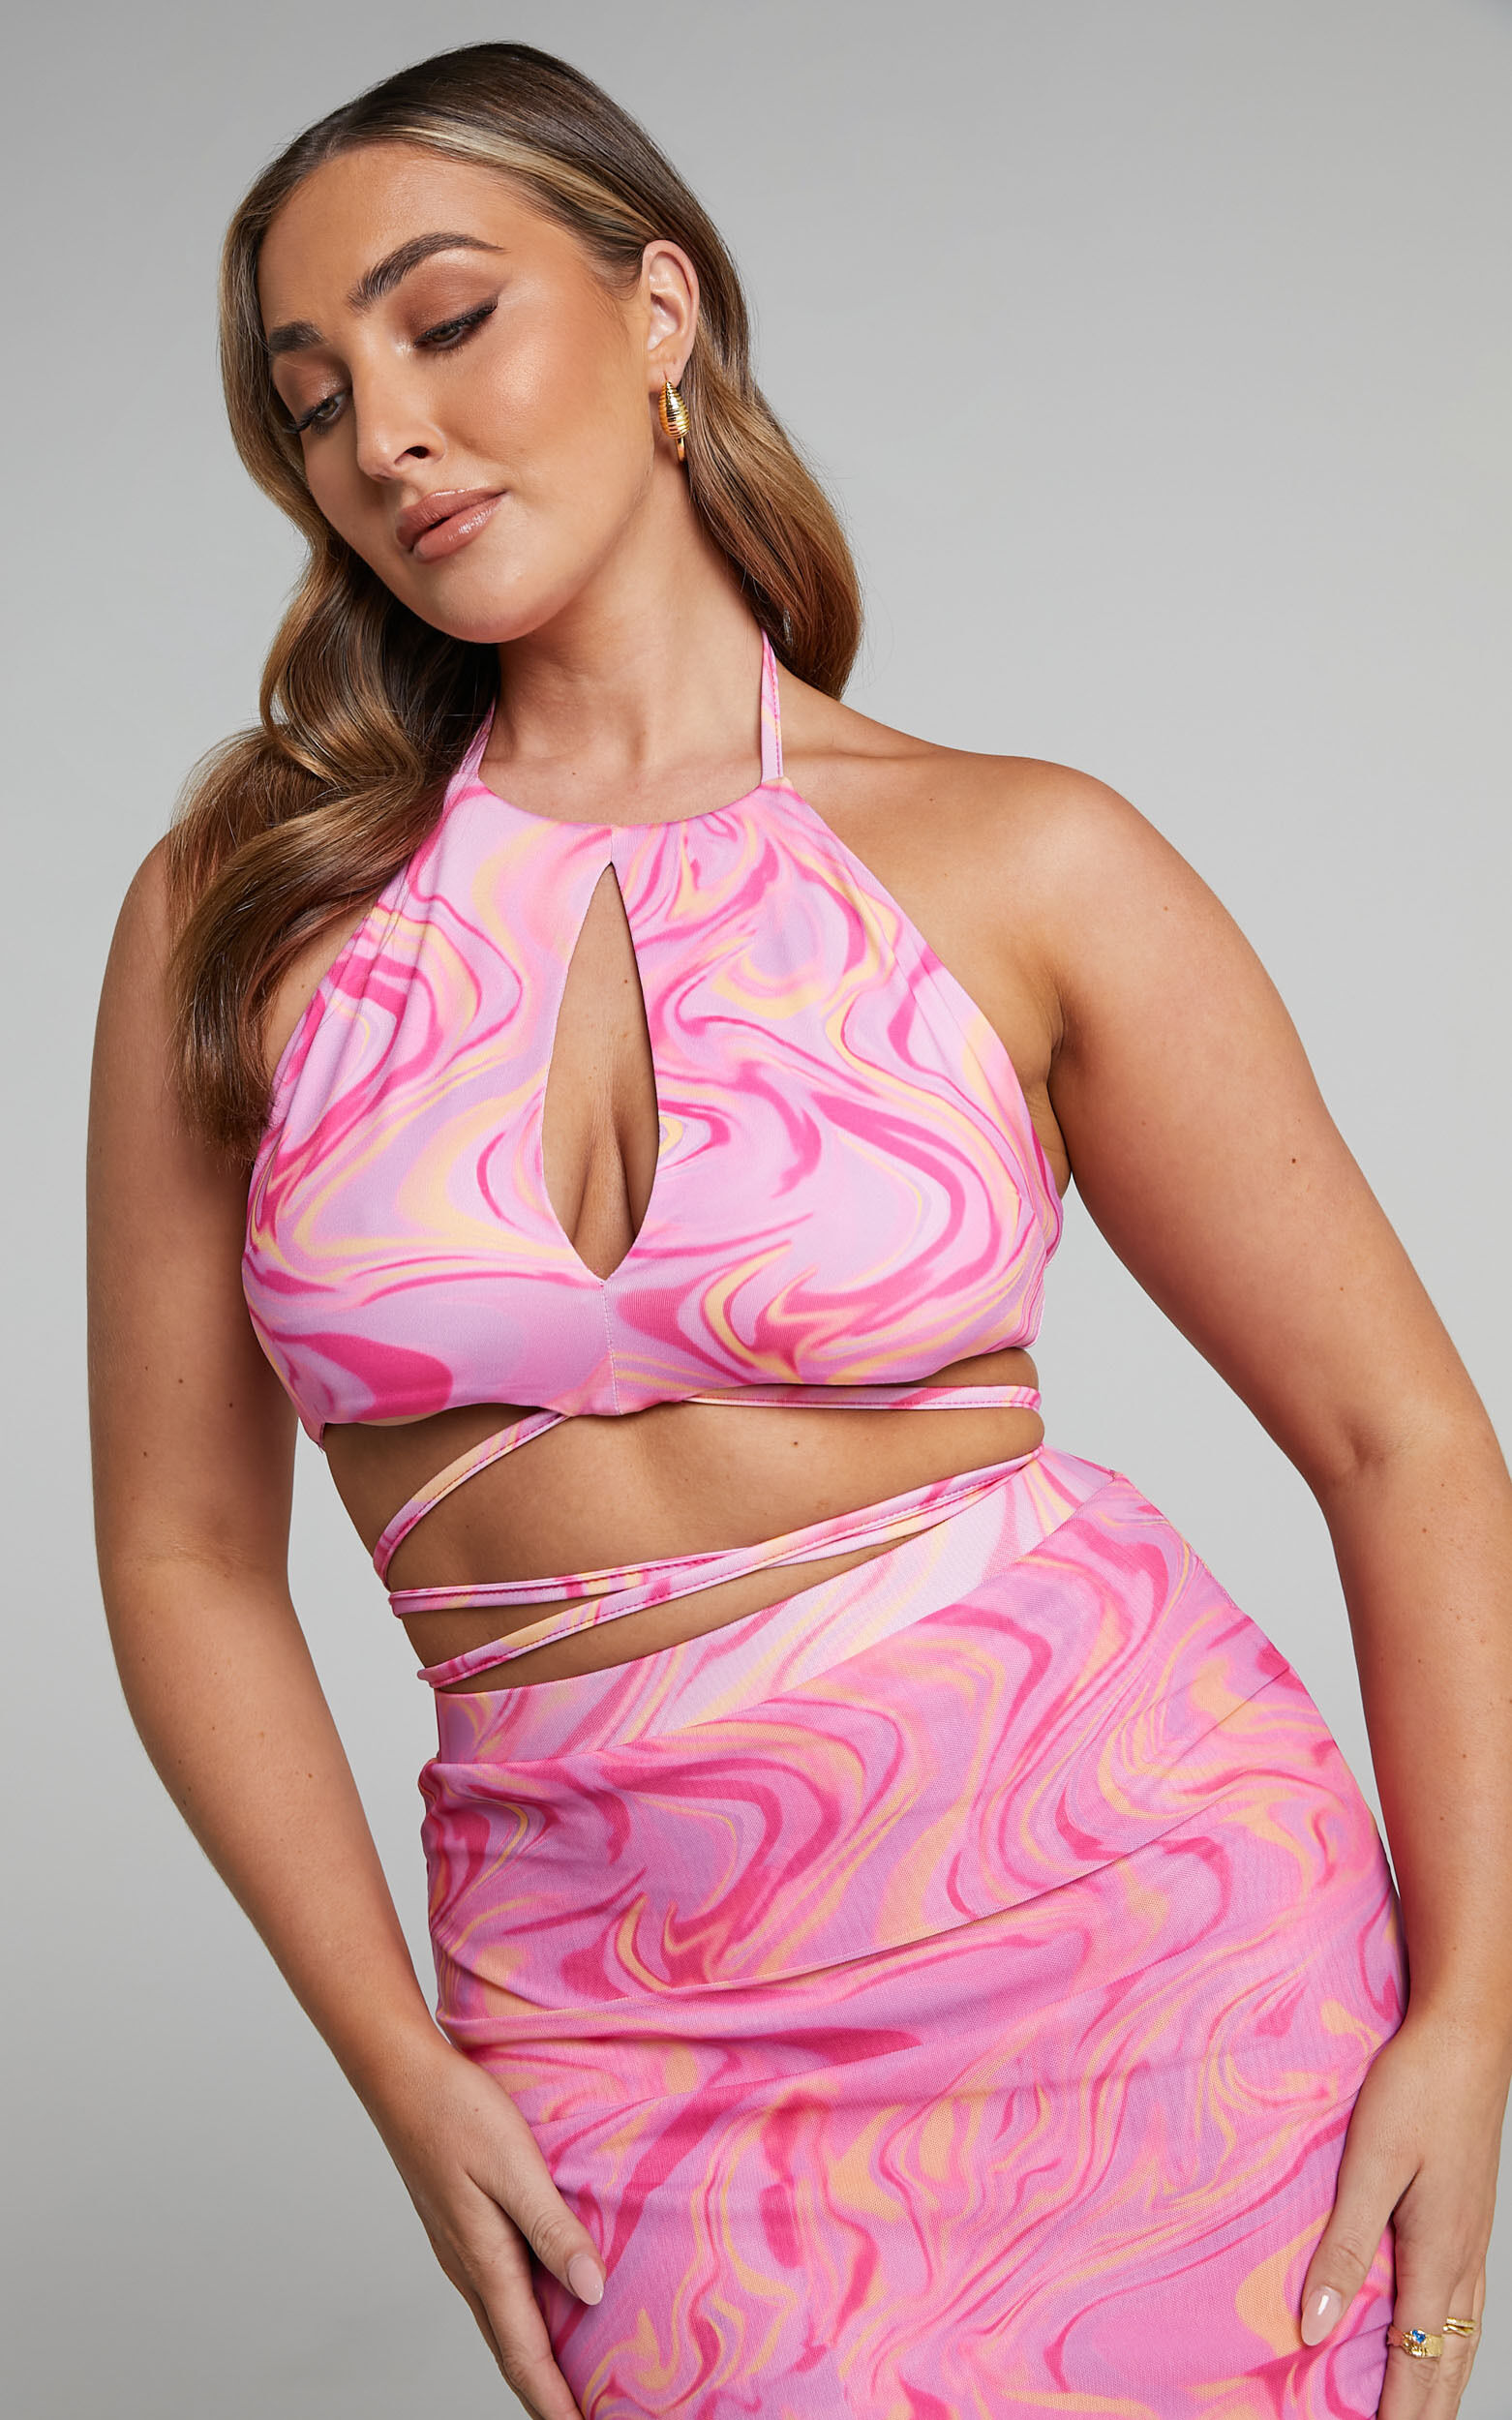 Analissa Keyhole Cutout Halter Crop Top in Pink Swirl - 06, PNK1, super-hi-res image number null